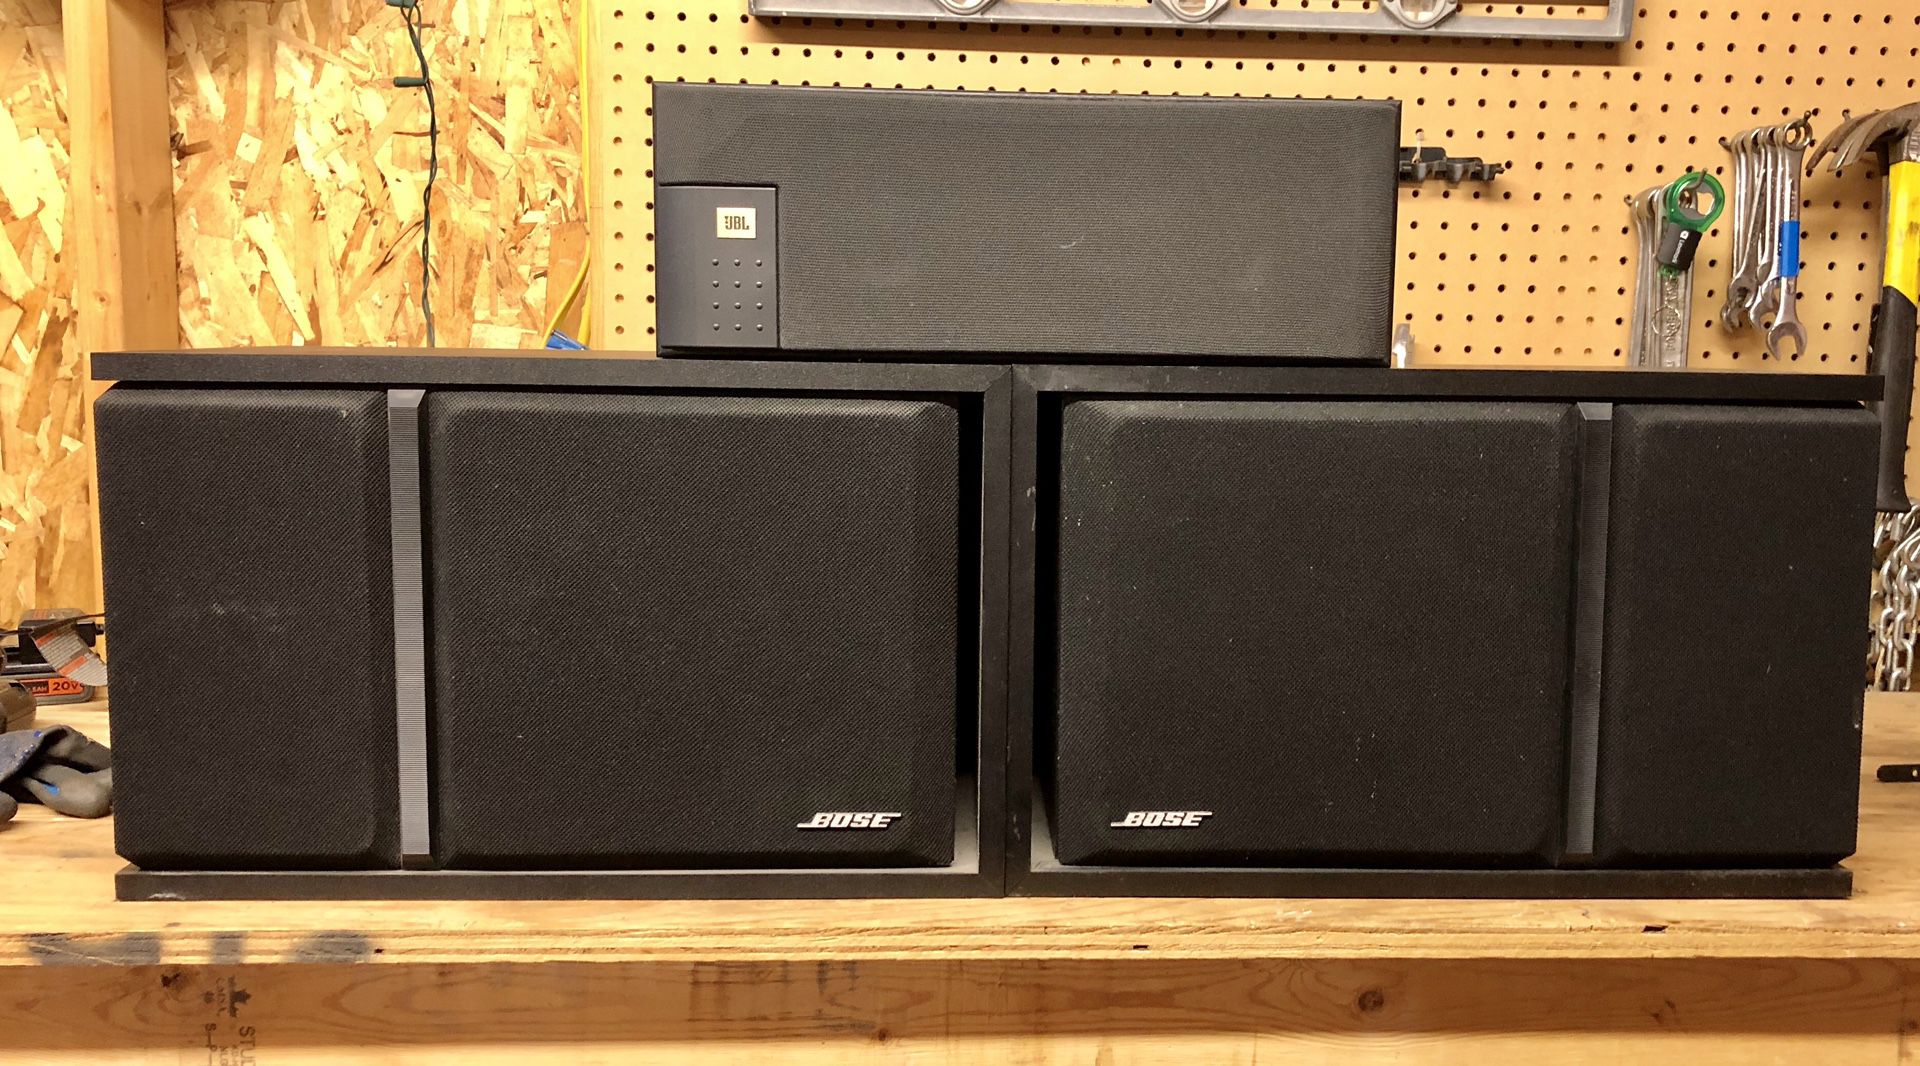 Bose 301 Home Audio Speakers and JBL Center